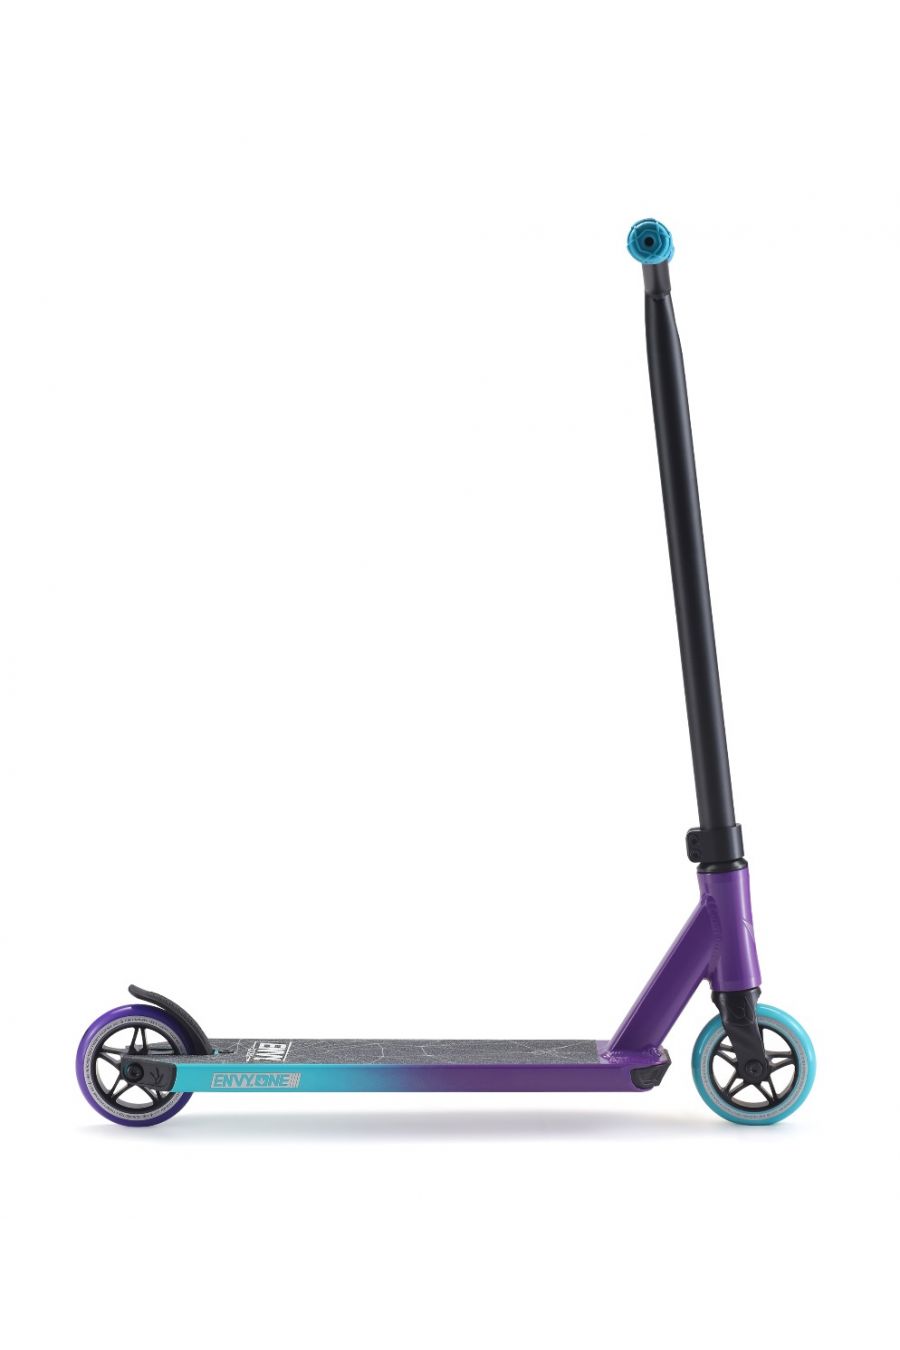 Envy One S3 Complete Scooter (Purple / Teal)